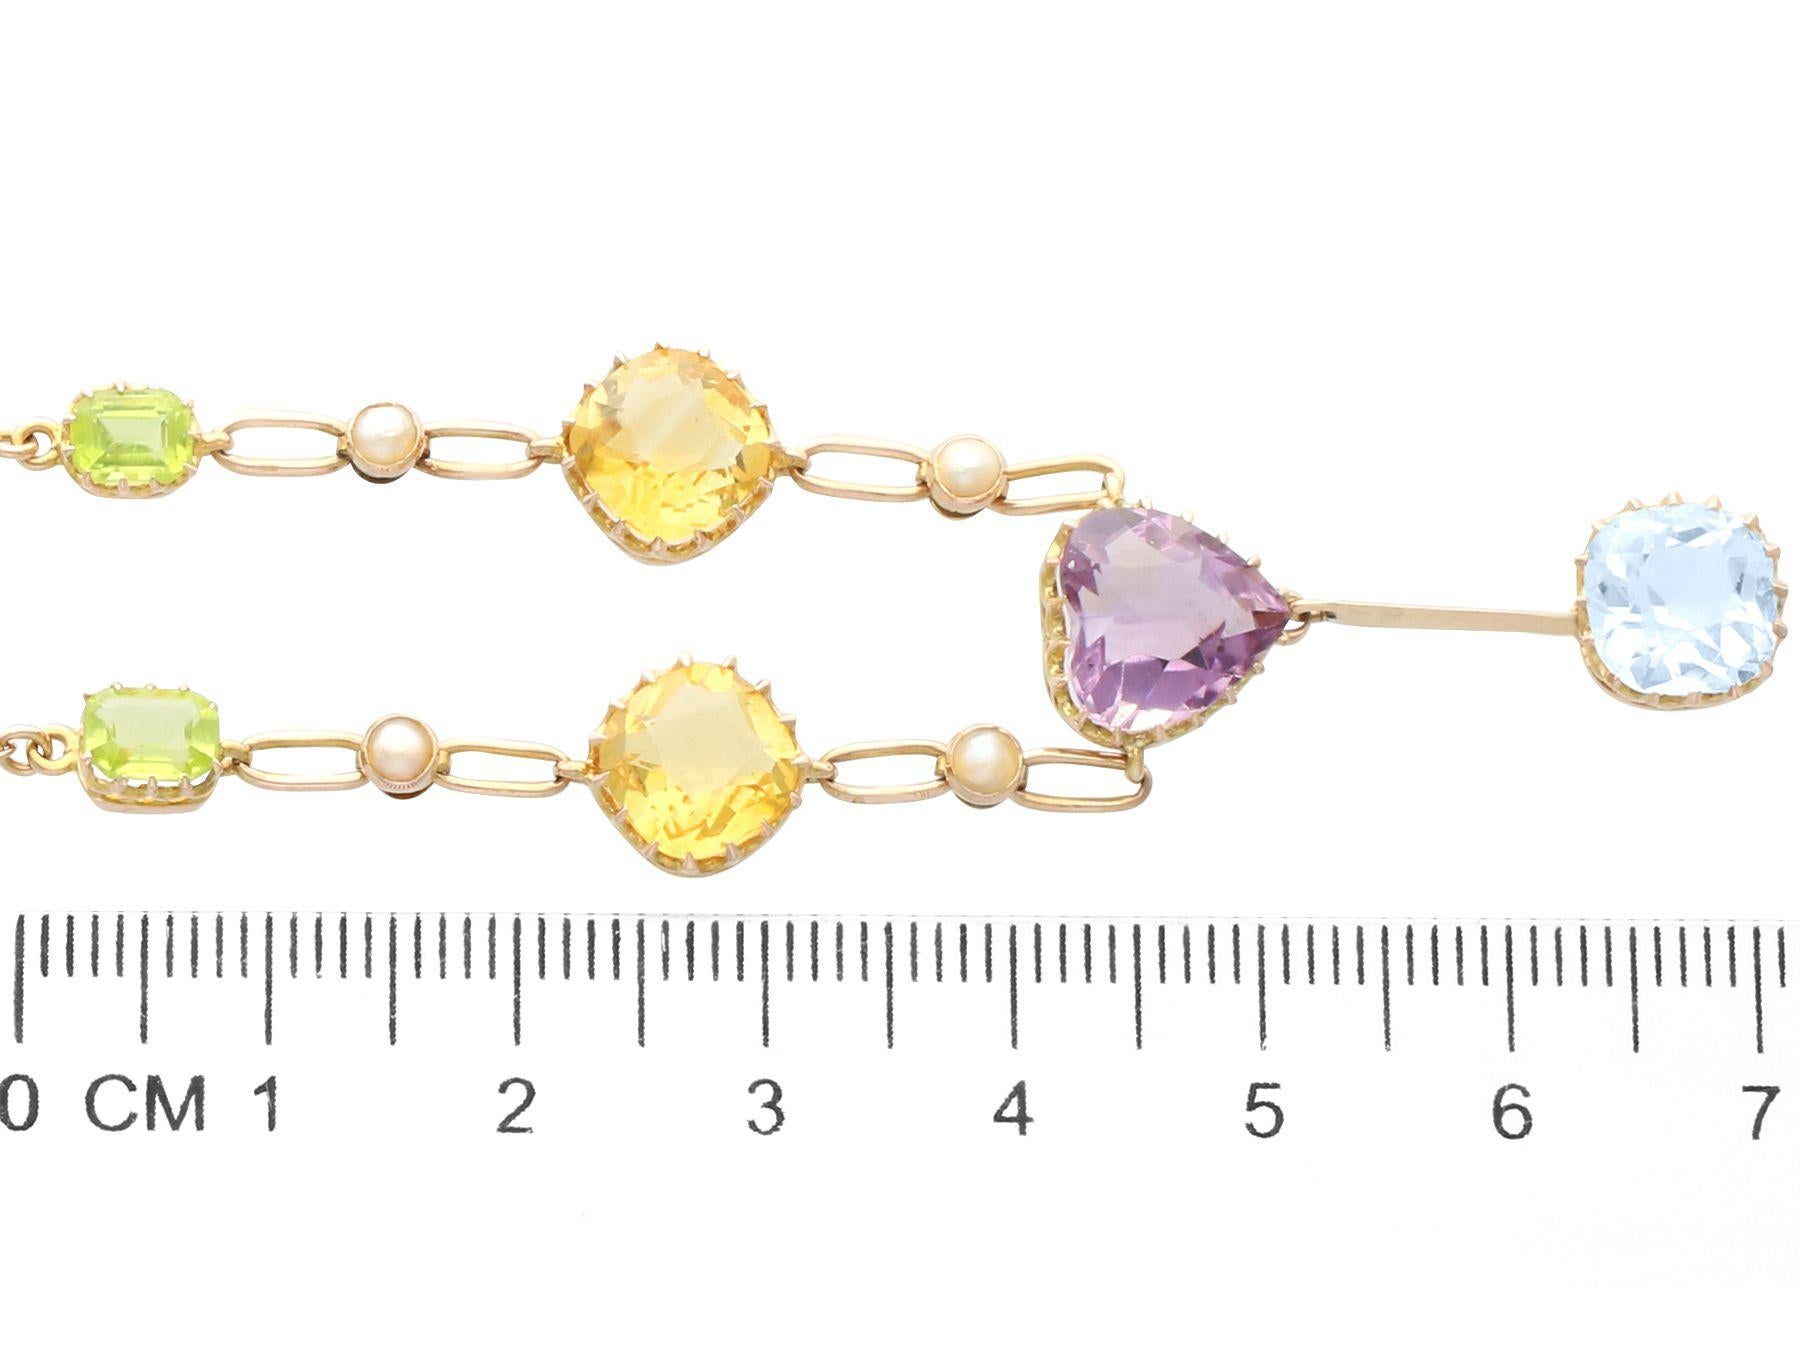 Women's or Men's 2.36ct Aquamarine, 3.72ct Citrine, 2.10ct Amethyst Peridot and Pearl Necklace For Sale